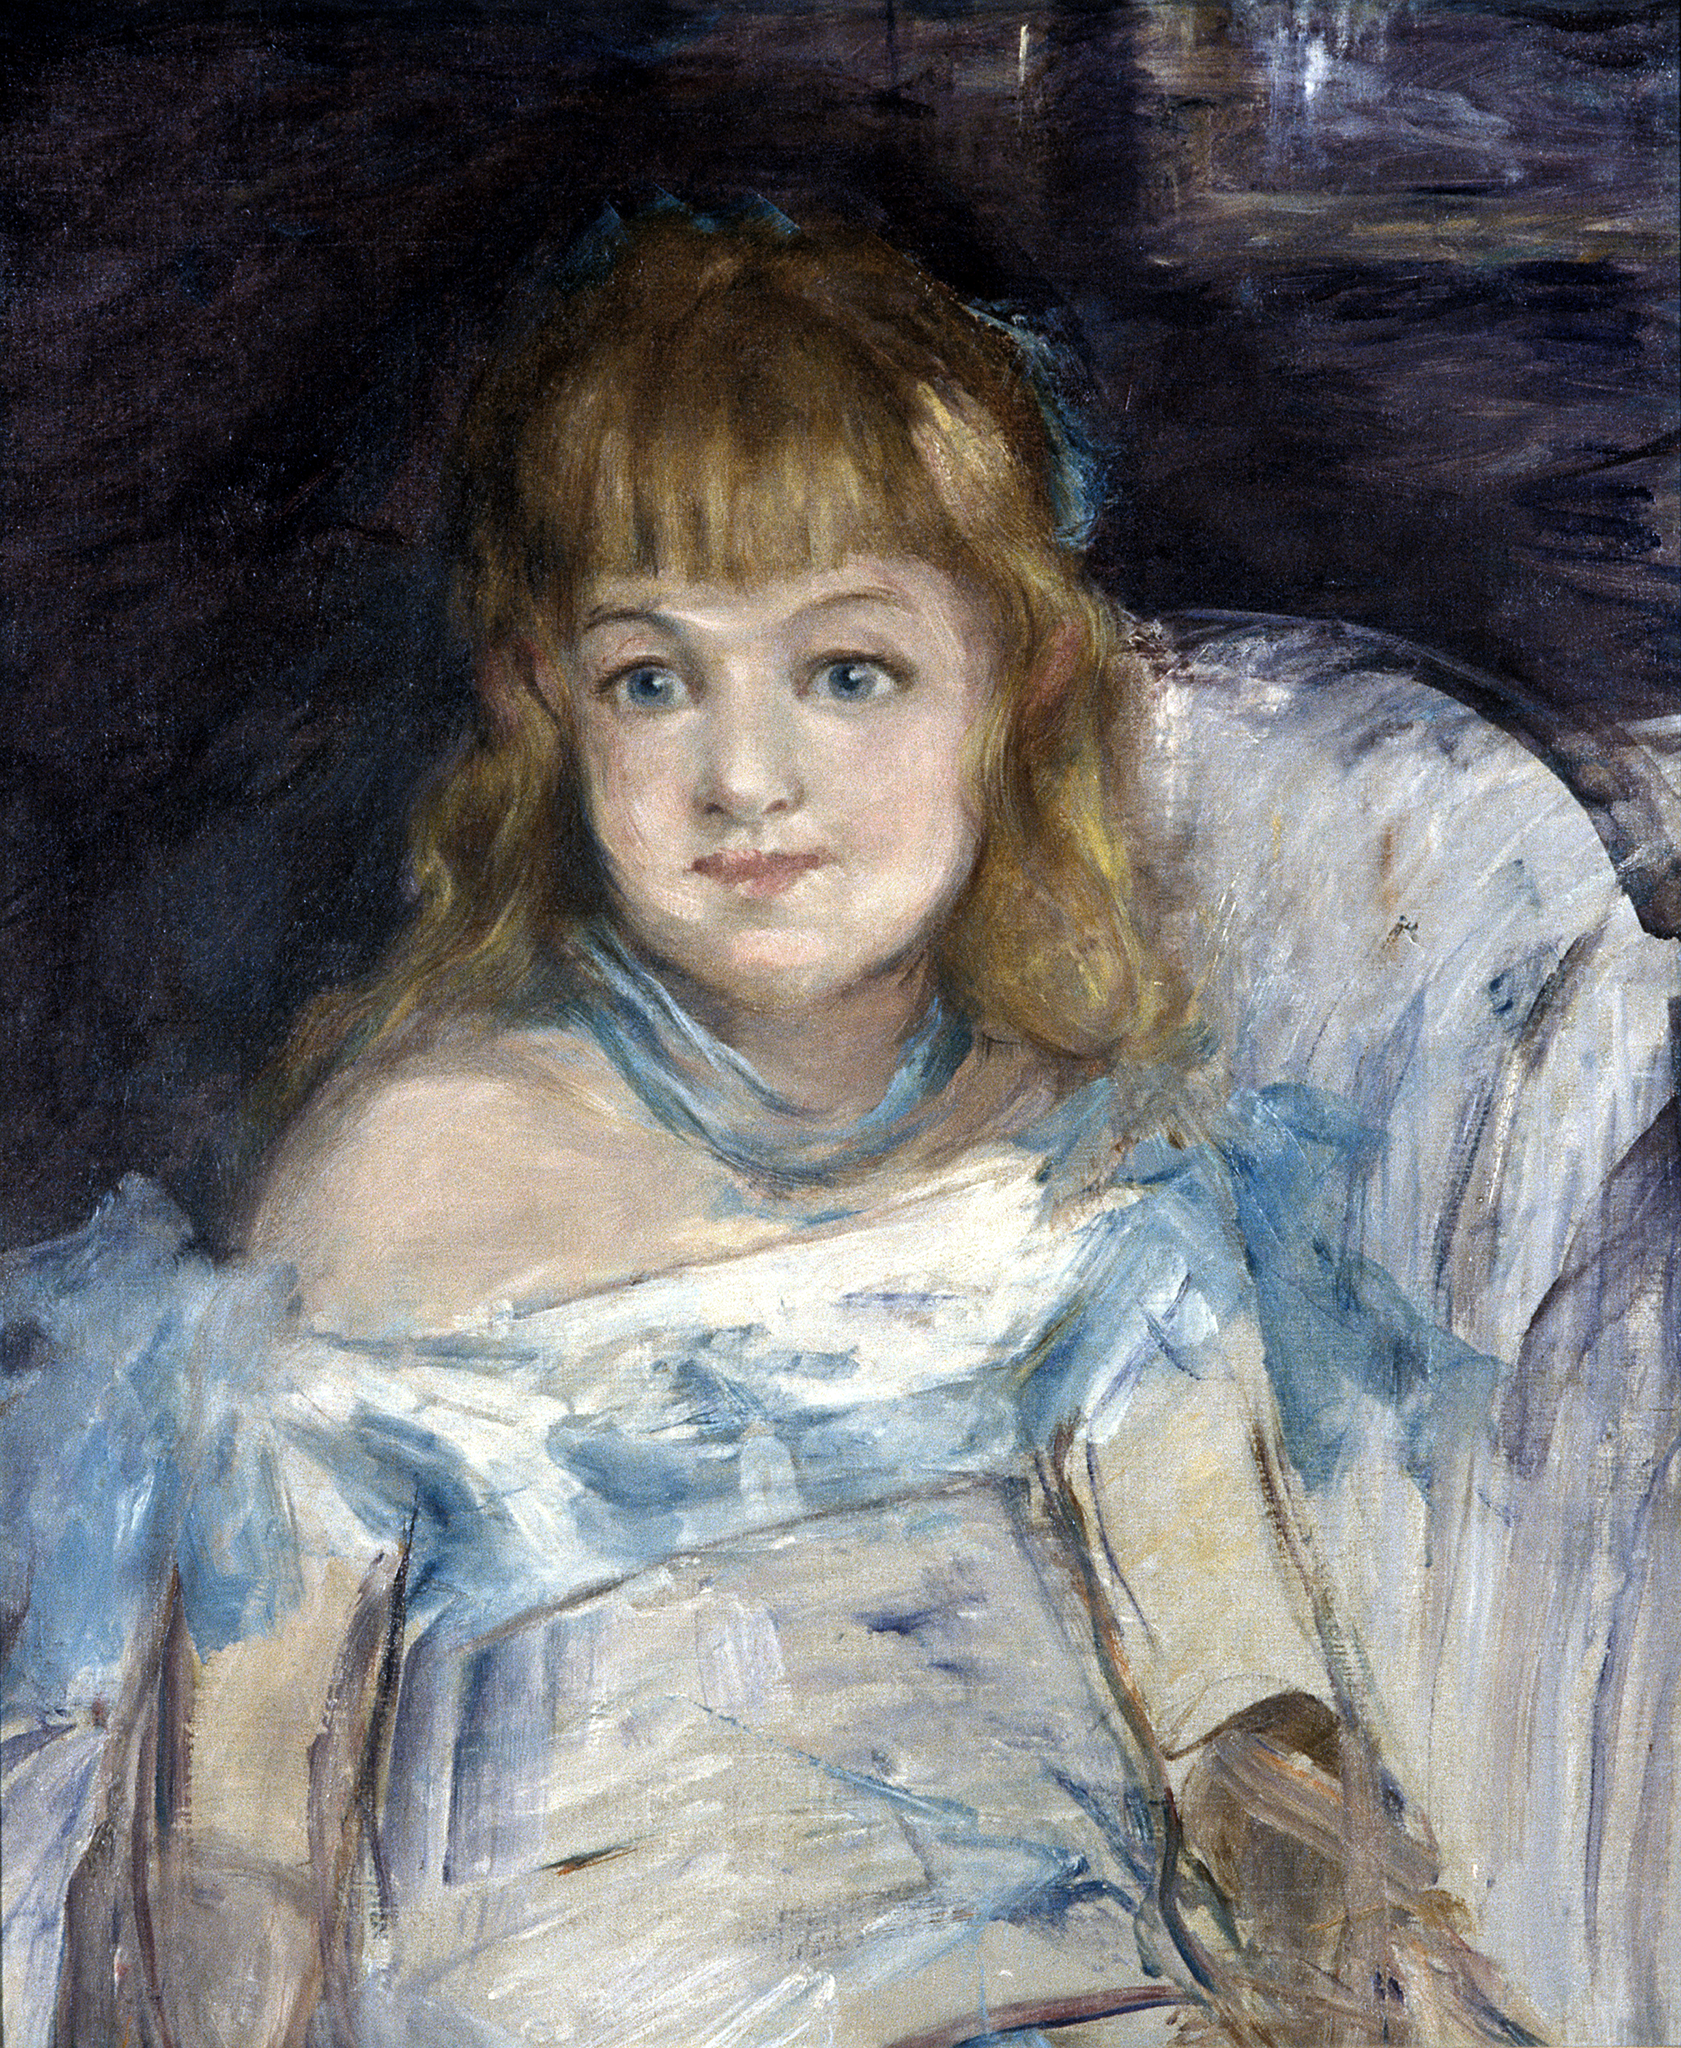 A painting depicting a young girl wearing a light blue dress. She has blonde hair with a blue tie wrapped in it, along with blue eyes, and a blue tie around her neck. She sits on a white chair.